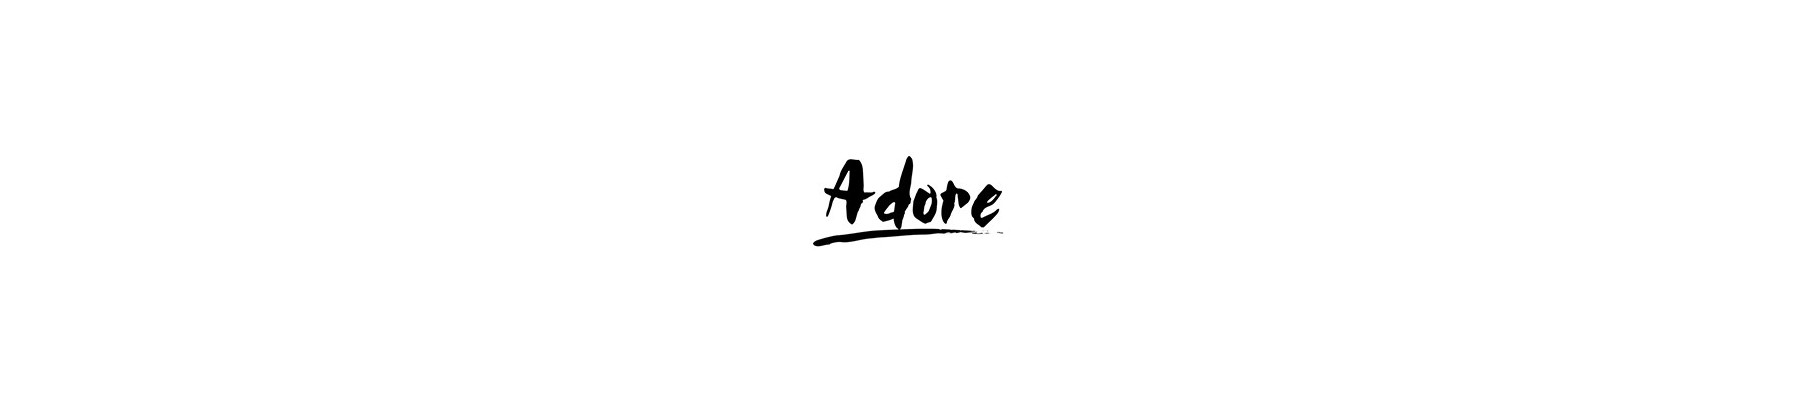 Adore condoms - high quality and competitive prices - Kondoomipood.ee